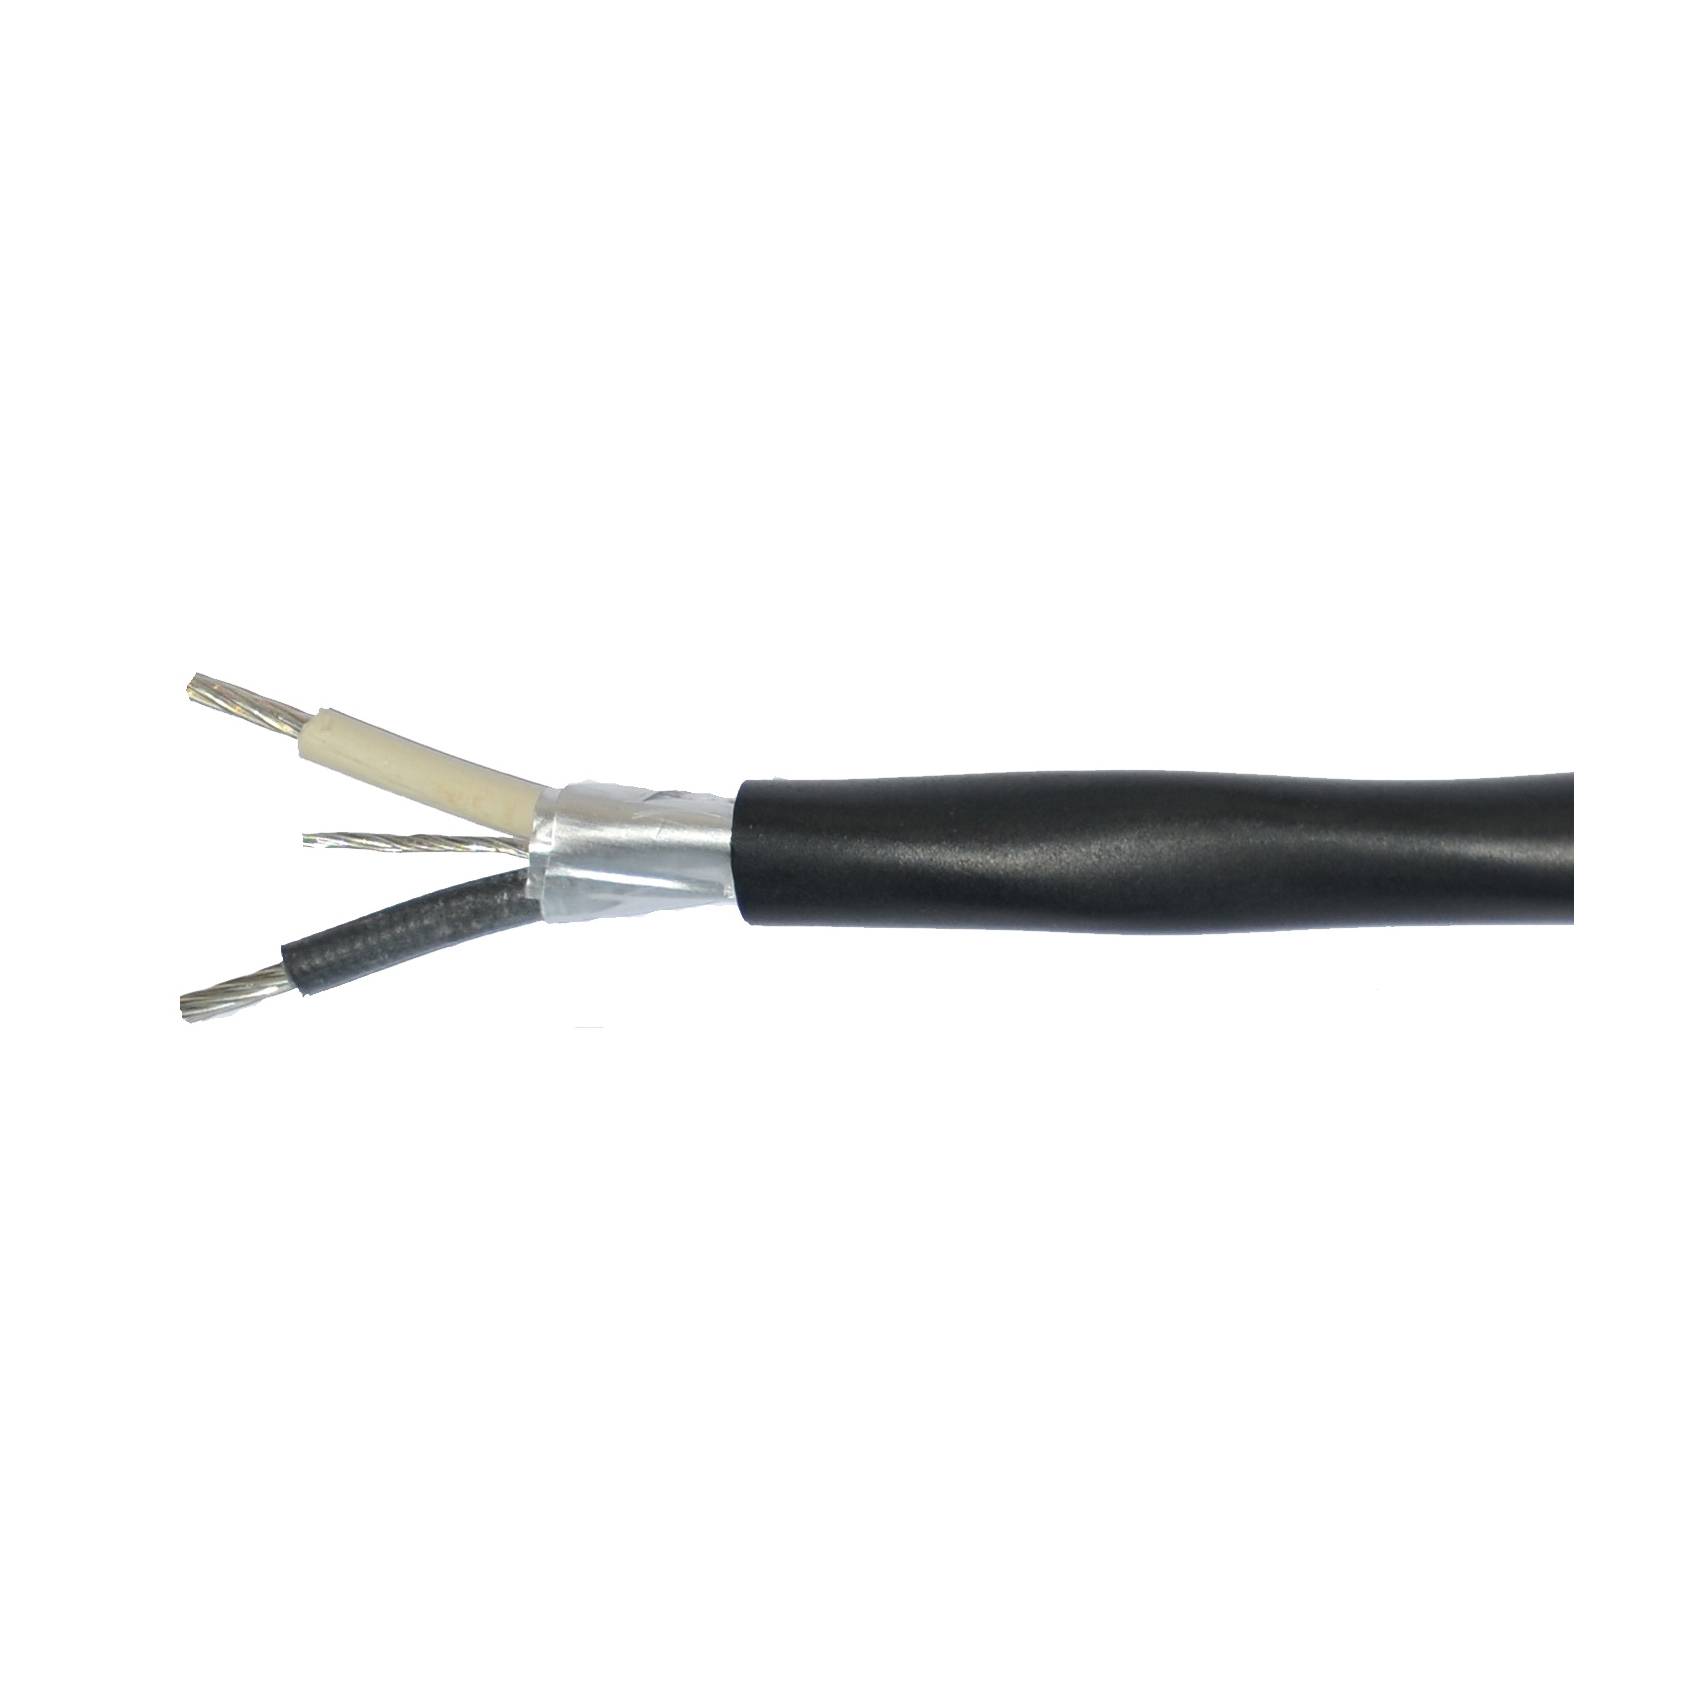 Omni Cable PVIC™ K32002 Type PLTC/ITC Shielded Instrumentation Cable, 300 VAC, (1 Pair) 20 AWG Annealed Bare Copper Conductor